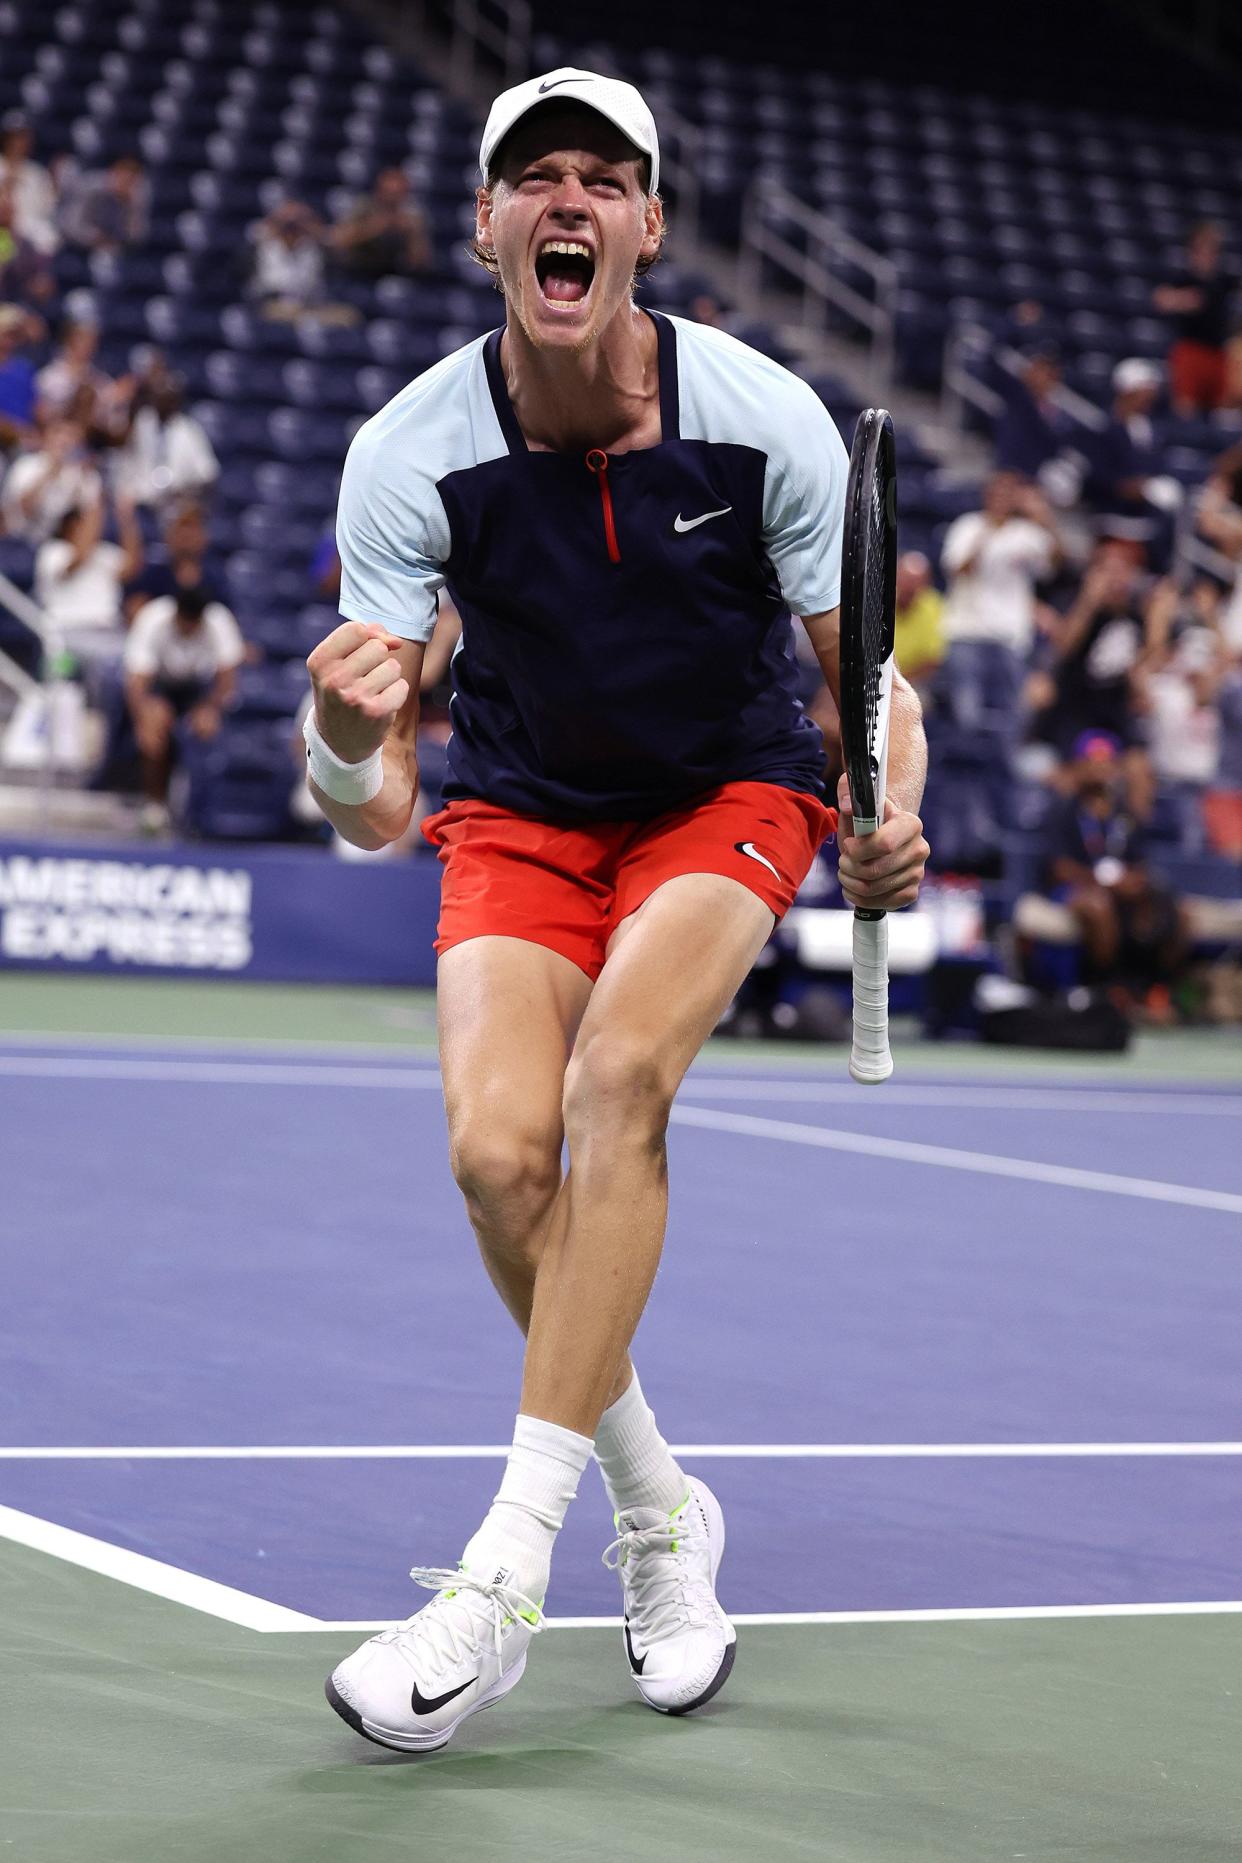 Jannik Sinner of Italy celebrates match point against Ilya Ivashka during their Men’s Singles Fourth Round match on Day Eight of the 2022 U.S. Open at USTA Billie Jean King National Tennis Center on Sept. 5, 2022, in Flushing, Queens.